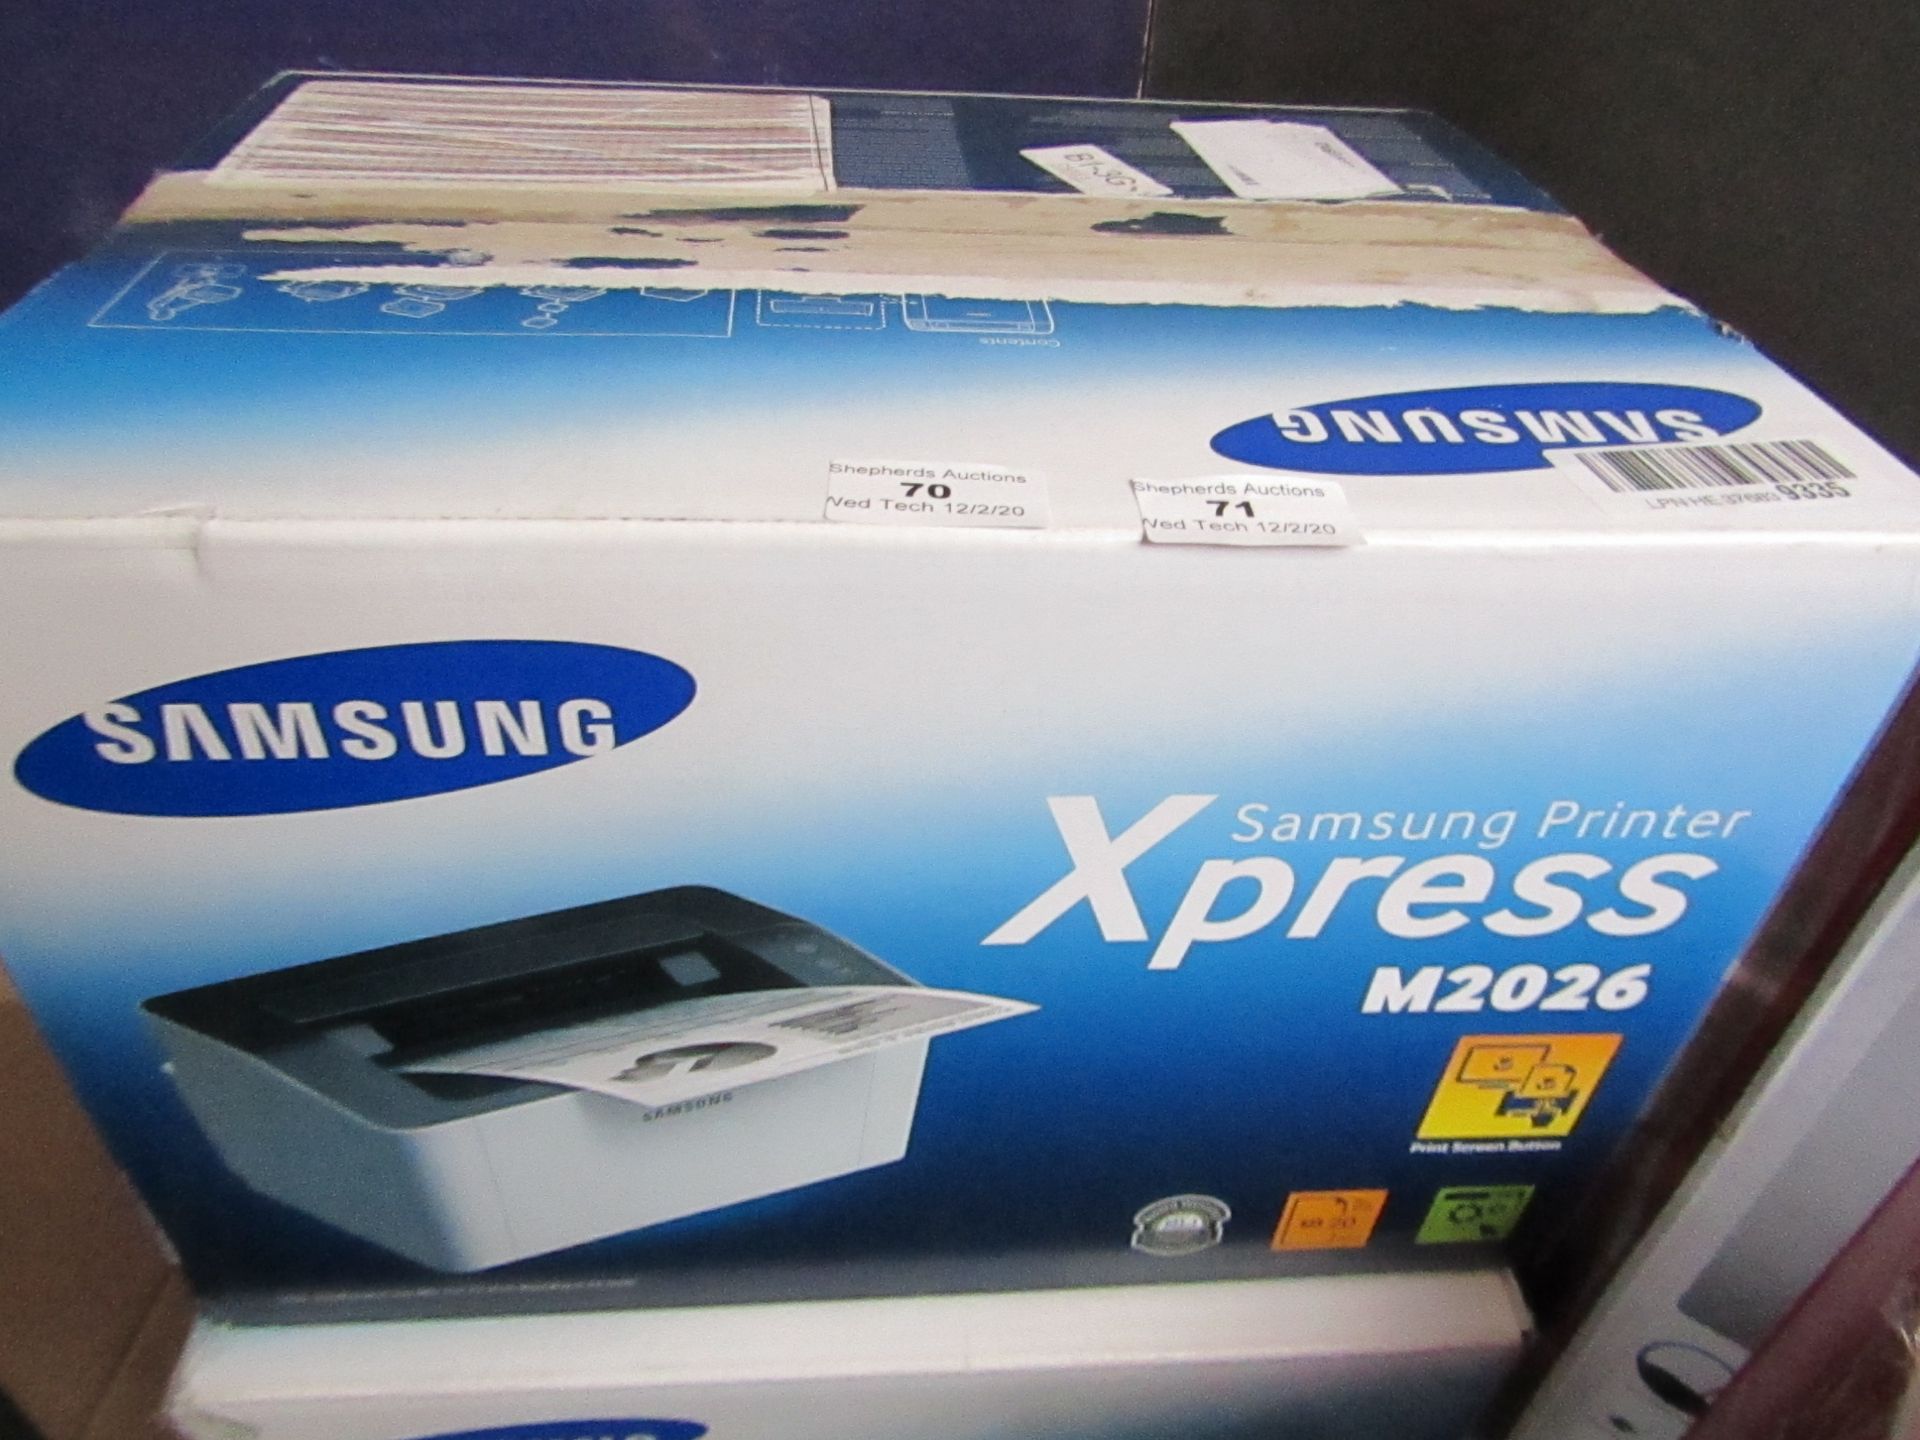 Samsung Xpress M2026 printer, untested and boxed. RRP £75.00